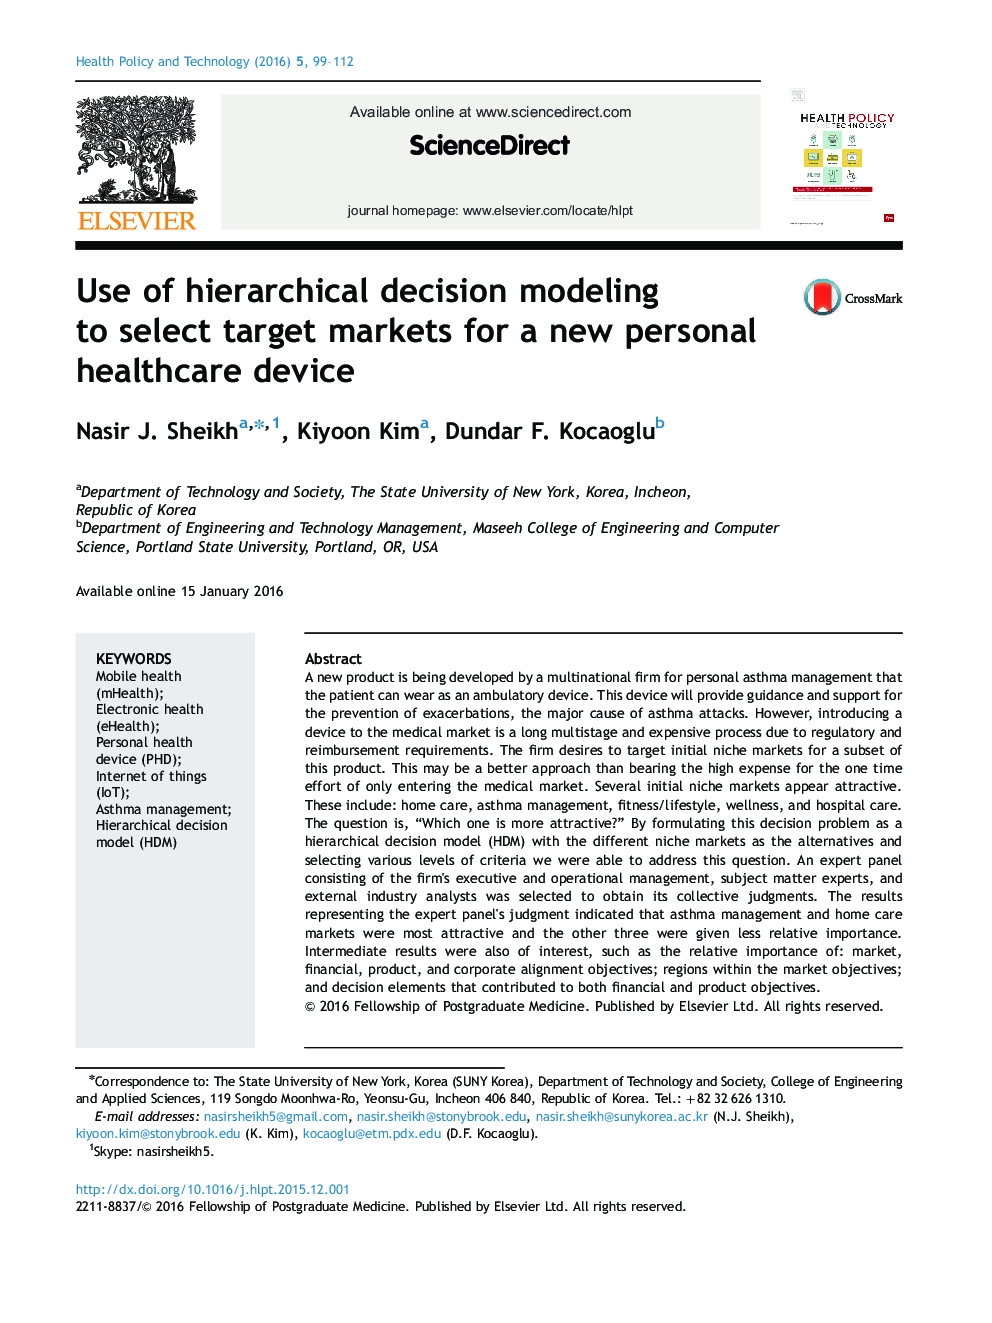 Use of hierarchical decision modeling to select target markets for a new personal healthcare device